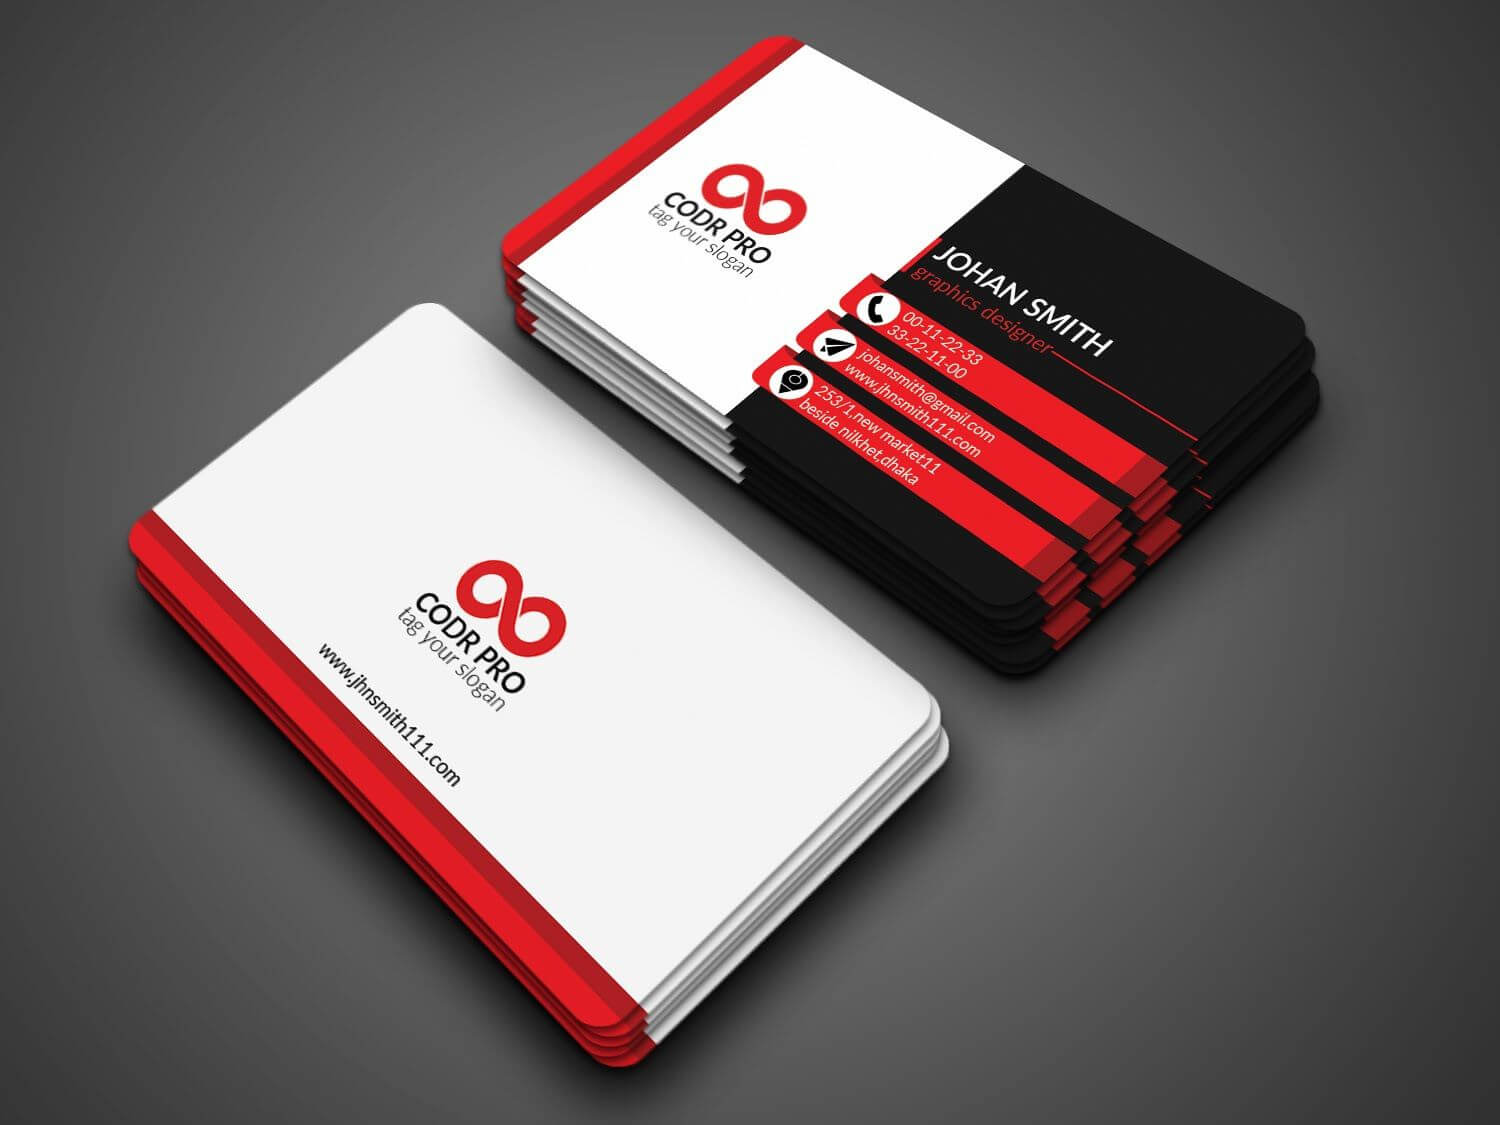 Professional Business Card Design In Photoshop Cs6 Tutorial Pertaining To Photoshop Cs6 Business Card Template